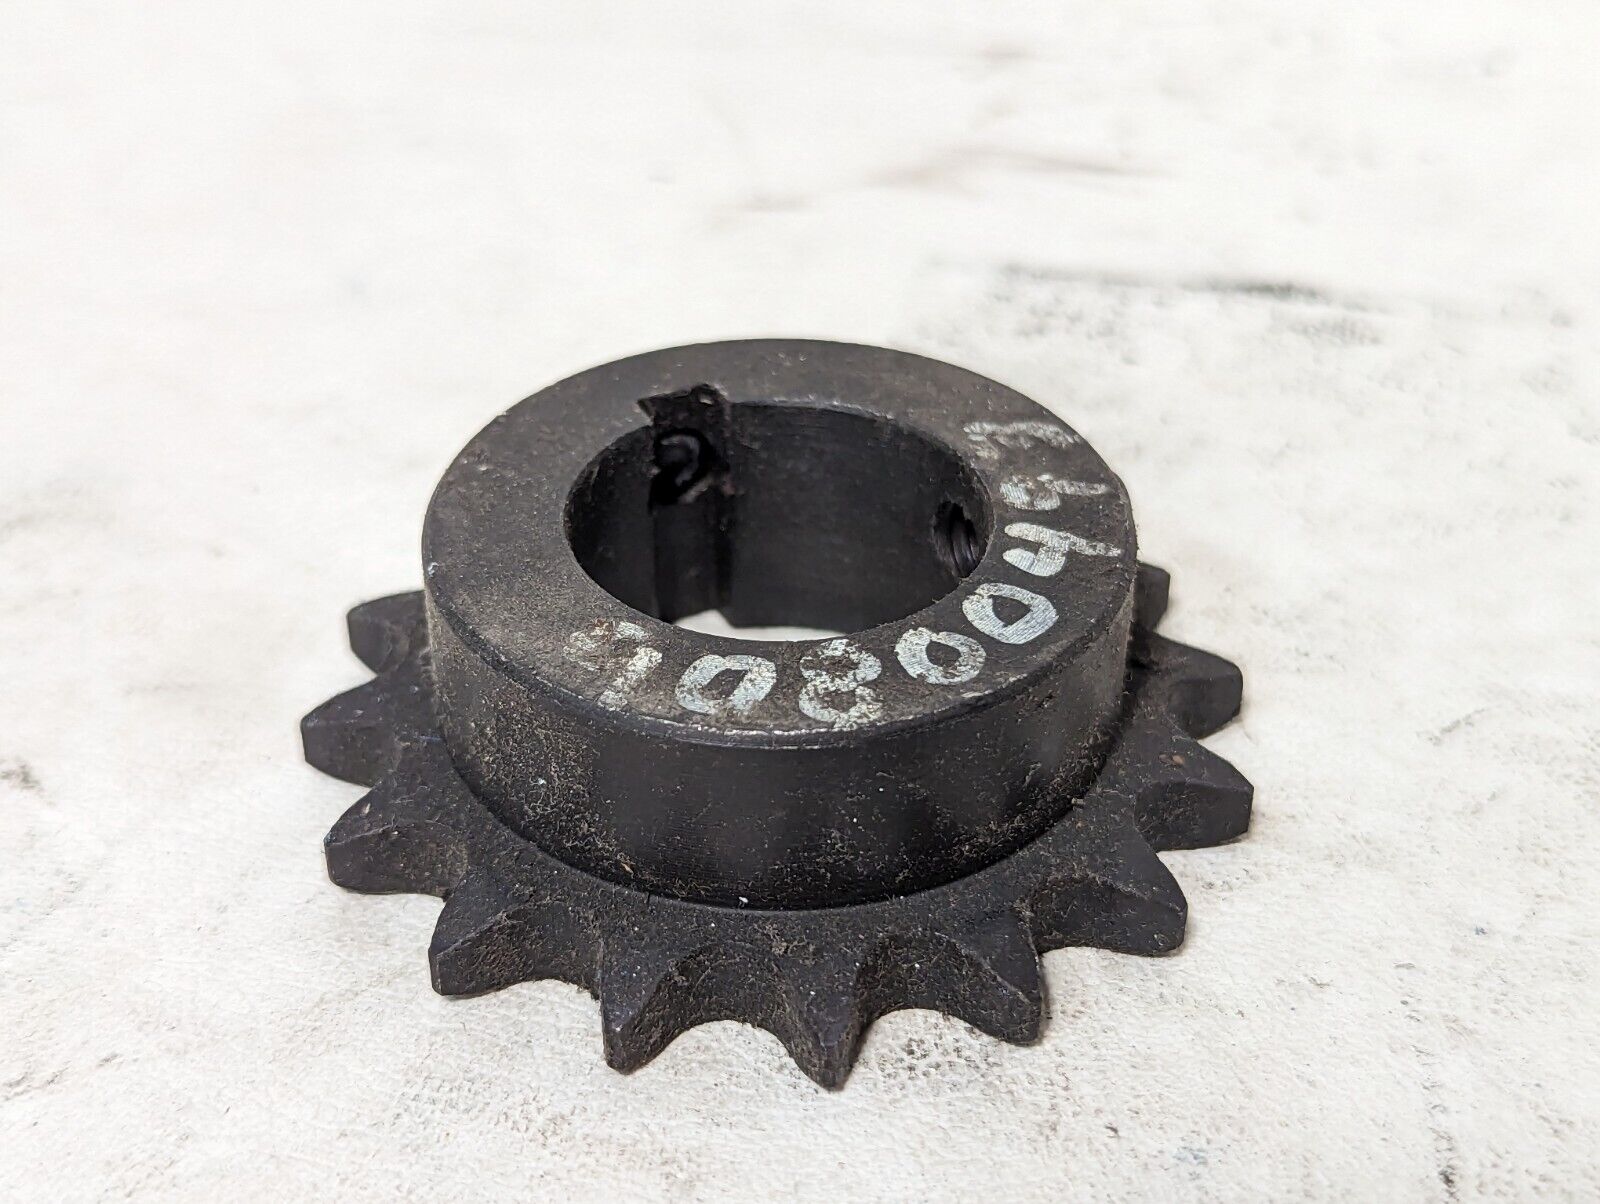 H40BS16 roller chain sprocket, 40# chain, 16 teeth, PWR China